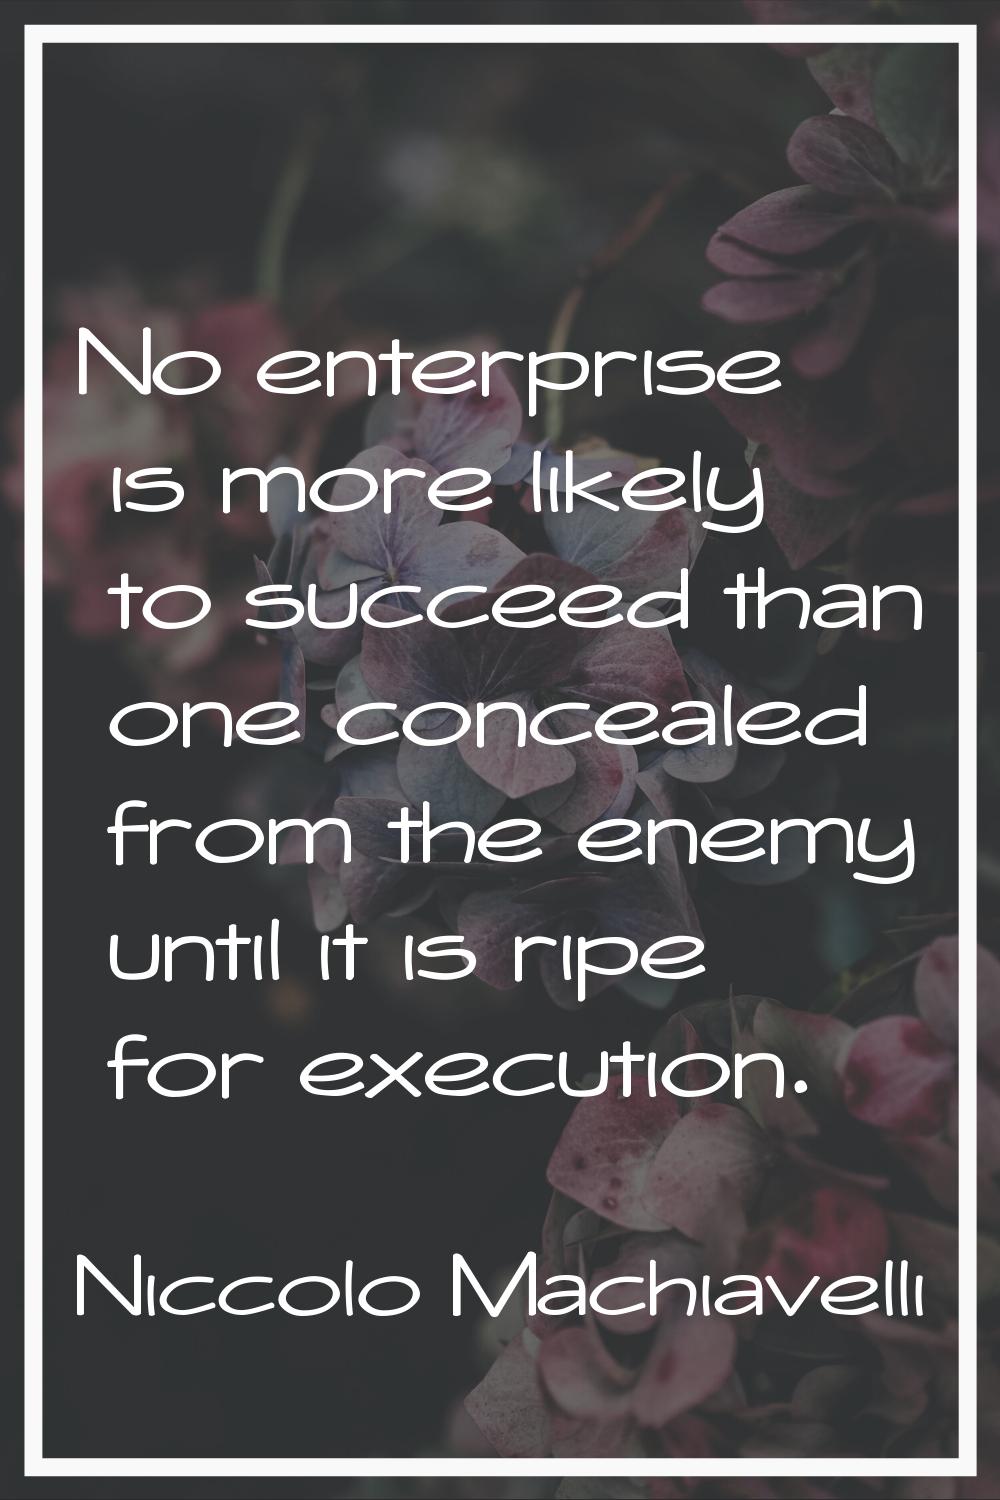 No enterprise is more likely to succeed than one concealed from the enemy until it is ripe for exec